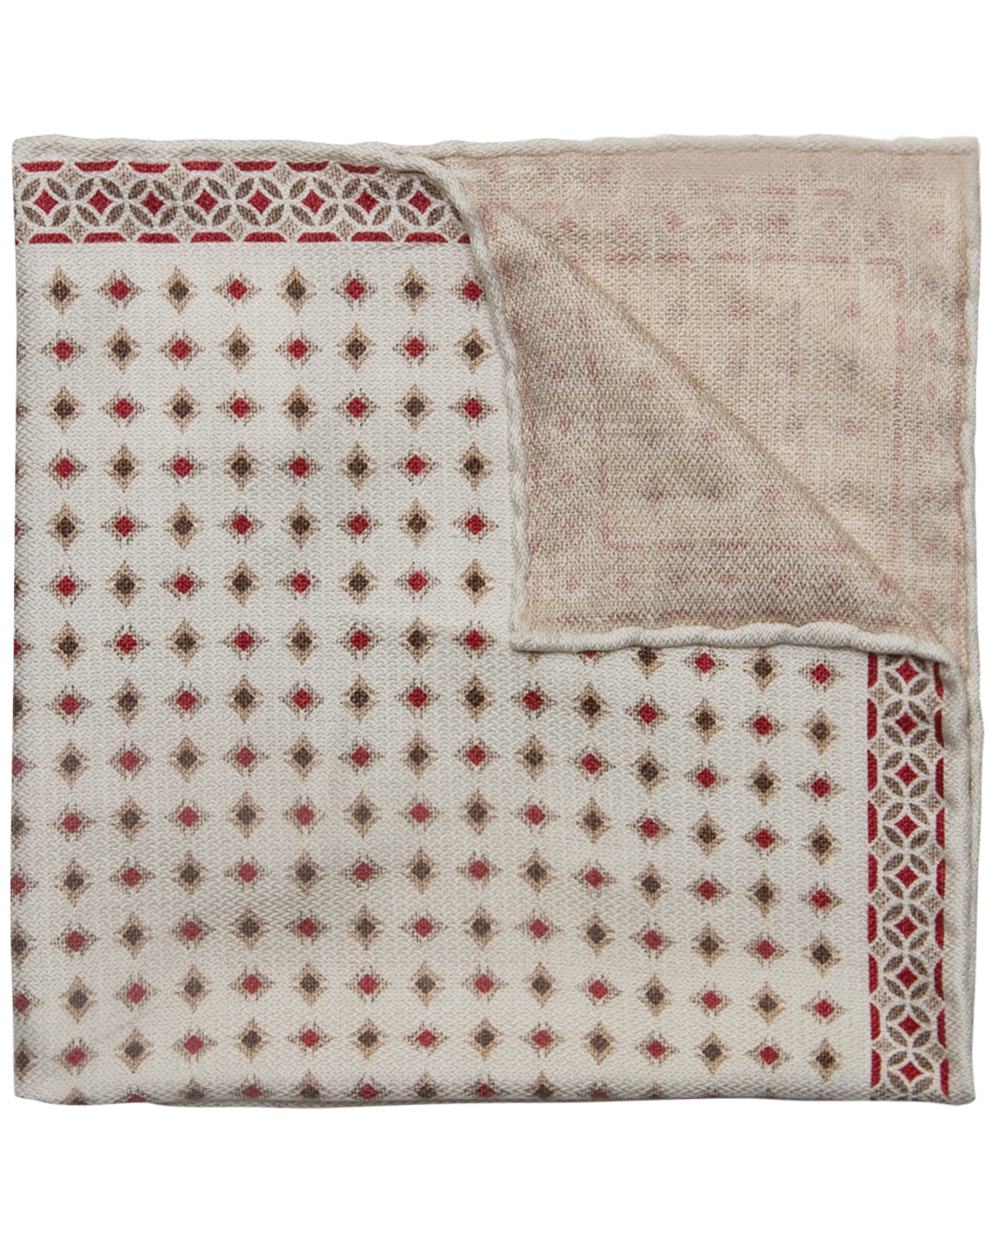 White and Red Neat Diamond Pocket Square